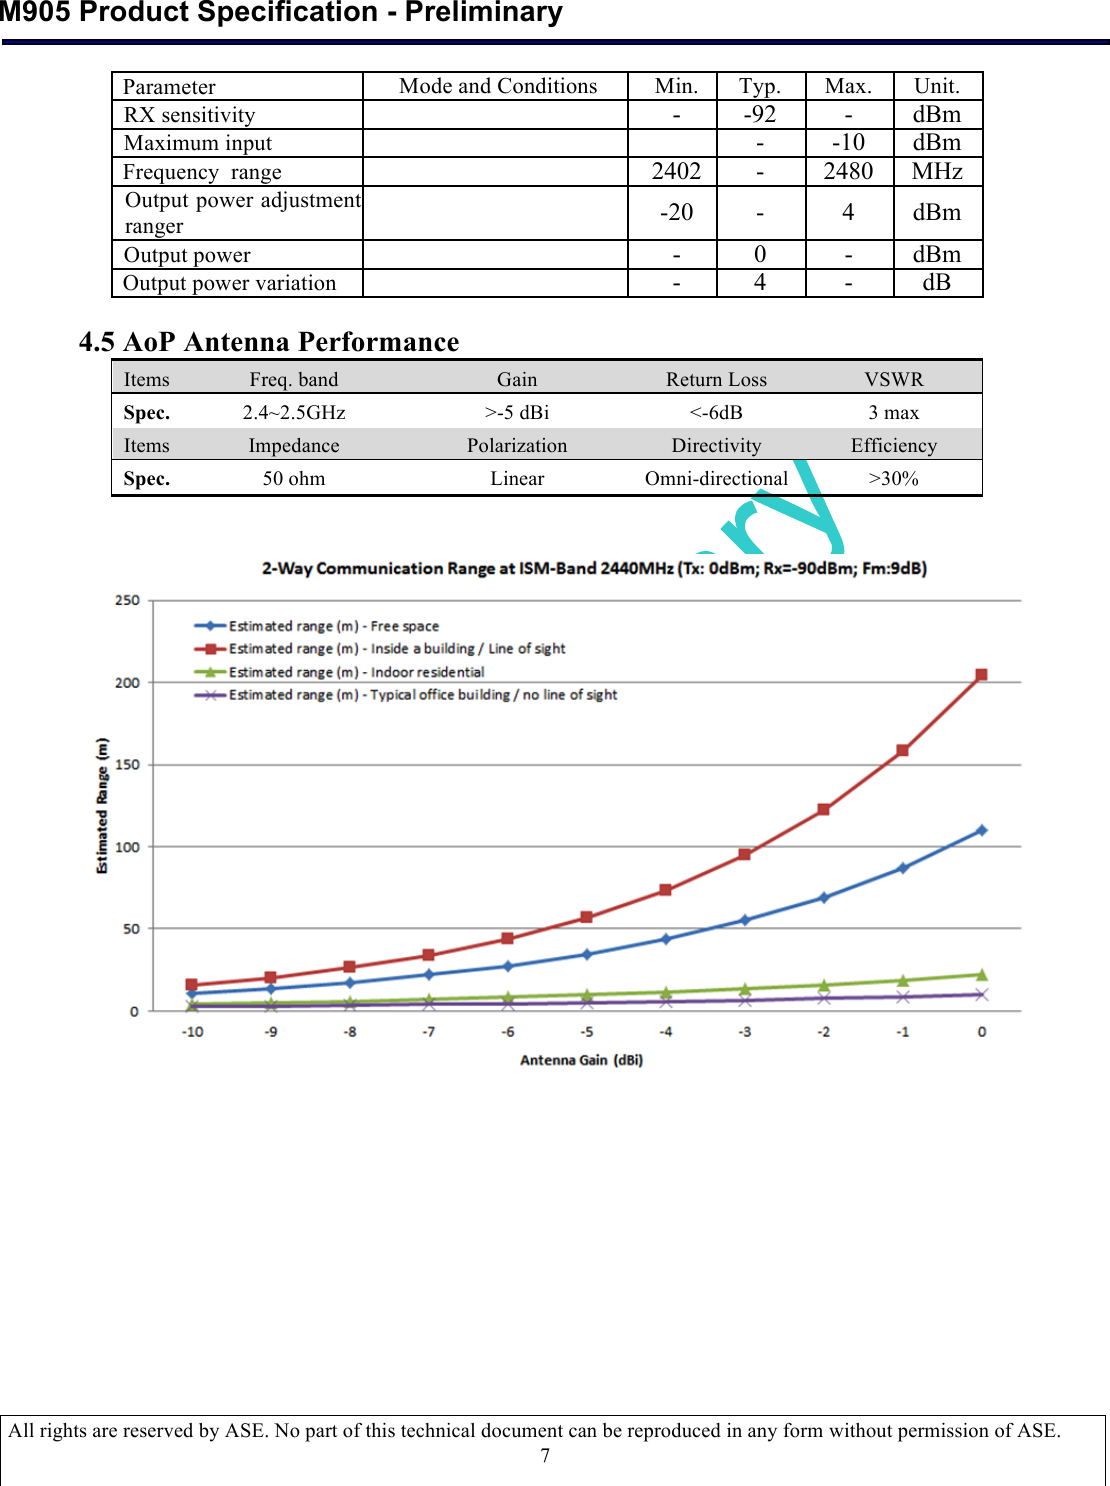  M905 Product Specification - Preliminary  All rights are reserved by ASE. No part of this technical document can be reproduced in any form without permission of ASE.  7 Parameter Mode and Conditions Min. Typ. Max. Unit.   RX sensitivity   - -92 - dBm   Maximum input   - -10 dBm Frequency  range  2402 - 2480 MHz Output power adjustment ranger  -20 - 4 dBm Output power  - 0 - dBm   Output power variation  - 4 - dB  4.5 AoP Antenna Performance Items Freq. band Gain Return Loss VSWR Spec. 2.4~2.5GHz &gt;-5 dBi &lt;-6dB 3 max Items Impedance Polarization Directivity Efficiency Spec. 50 ohm Linear Omni-directional &gt;30%                